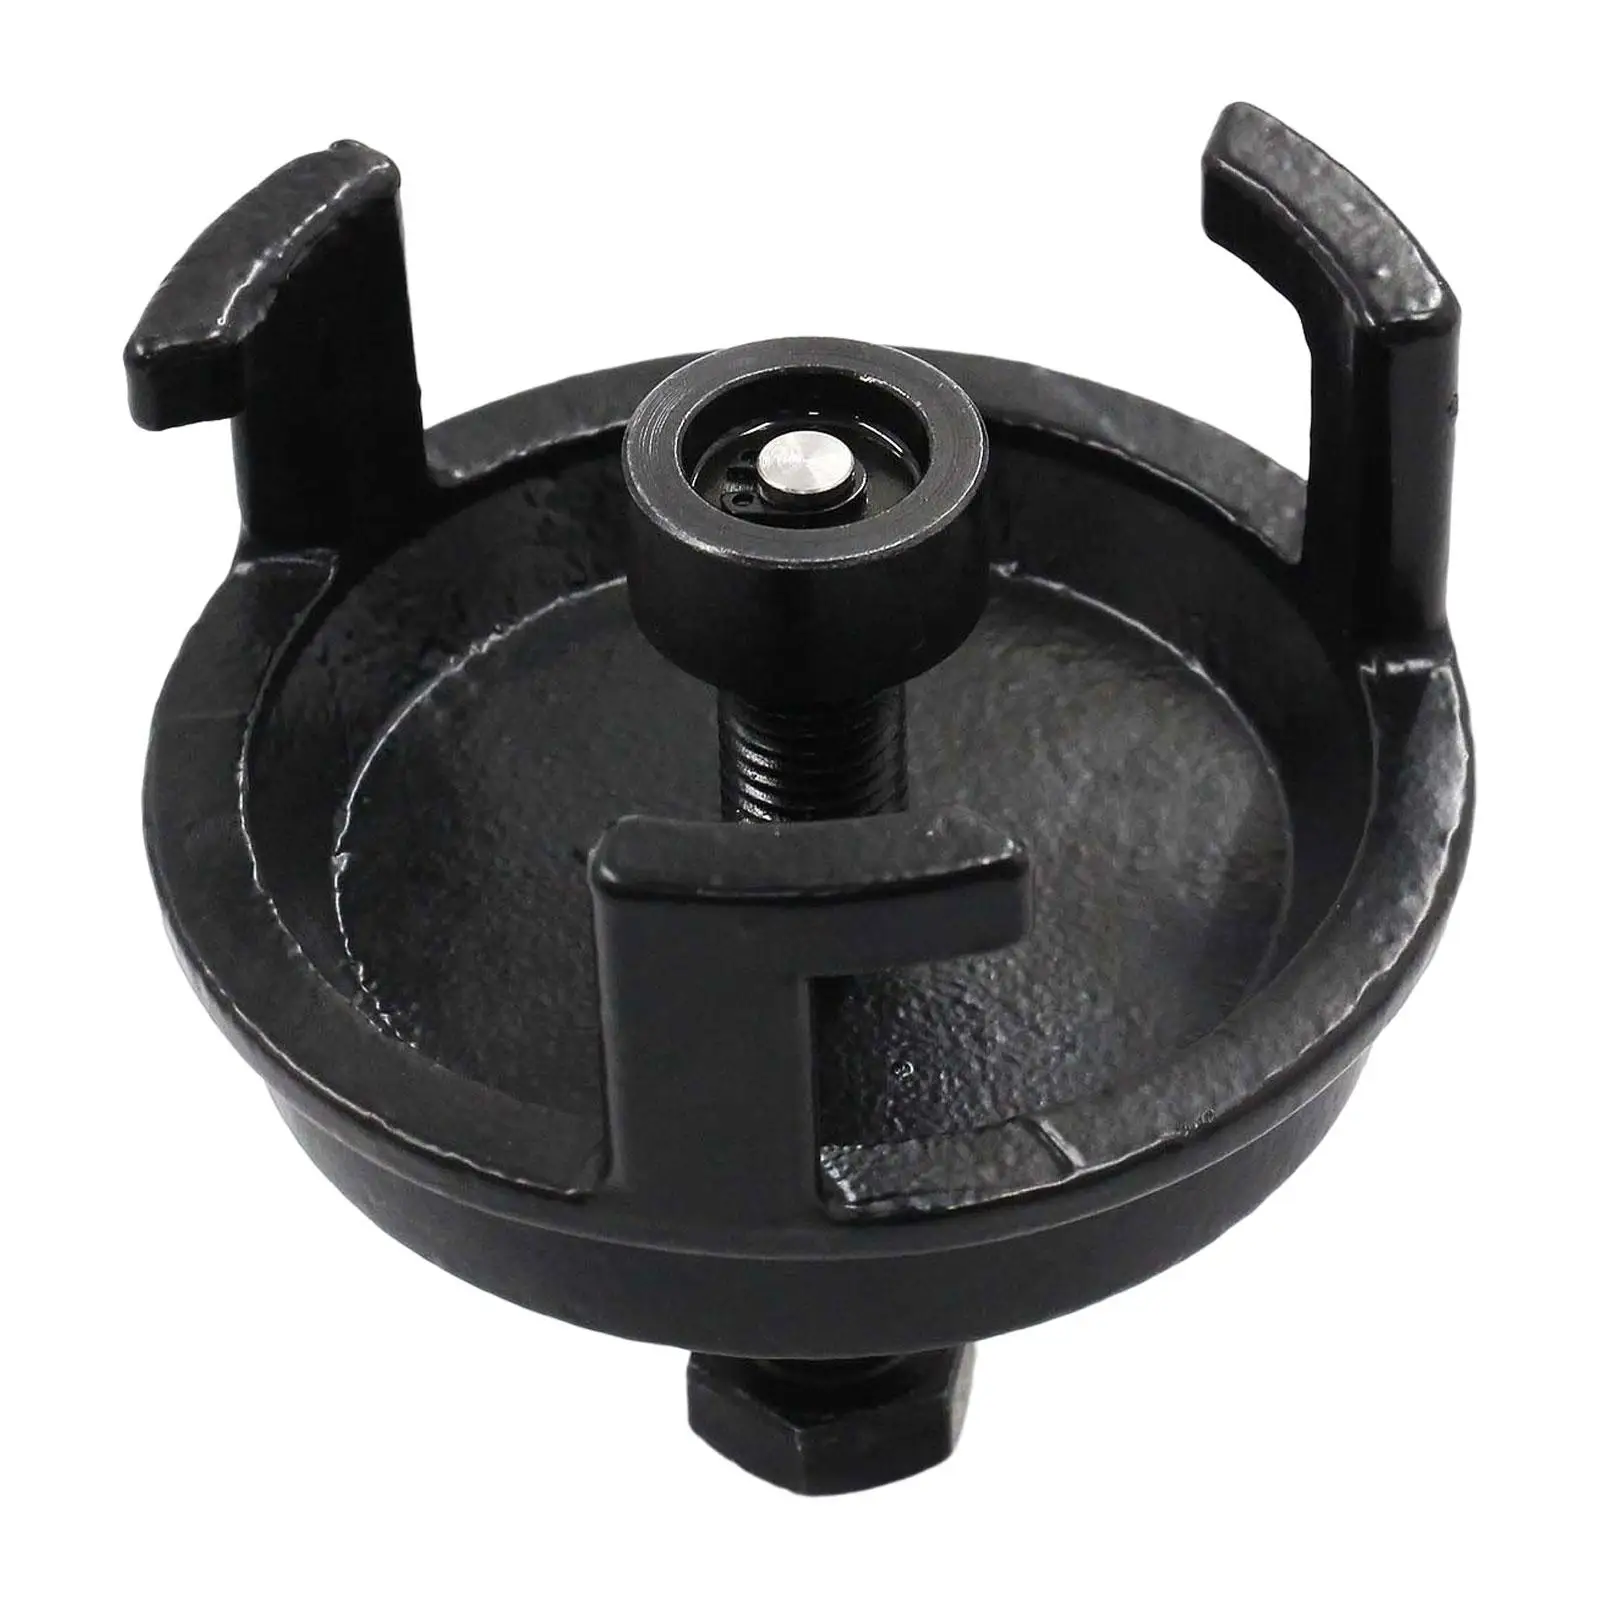 Harmonic Balancer Puller Accessories Replace Repair Parts Simple Using for Automotive Removal Tool Professional Crank Pulley